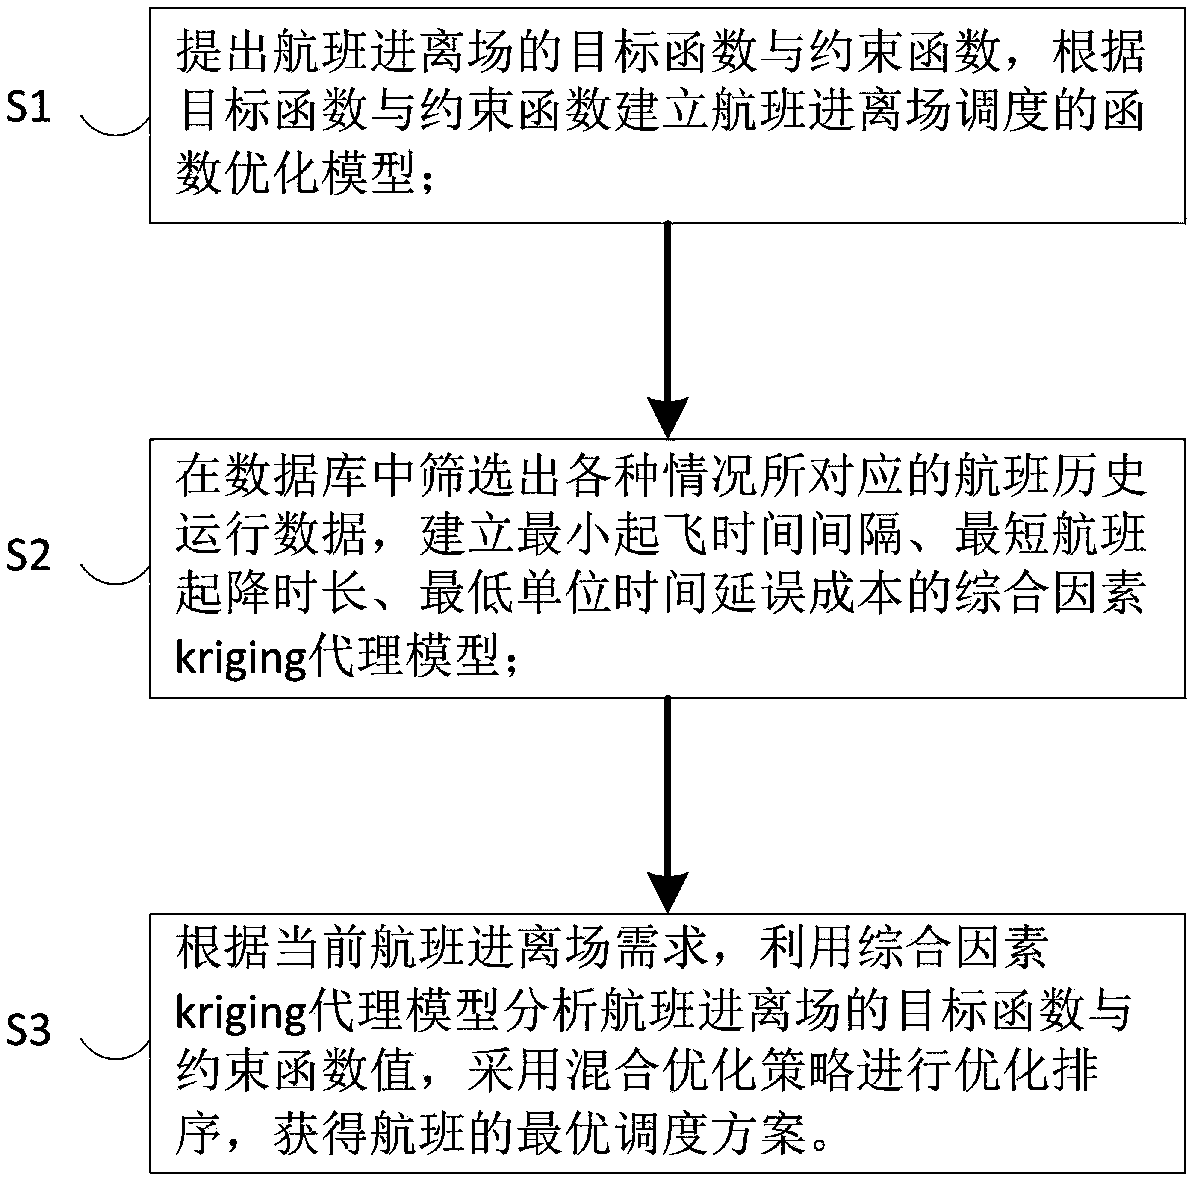 Flight entry/departure scheduling optimization method and system based on historical data driving